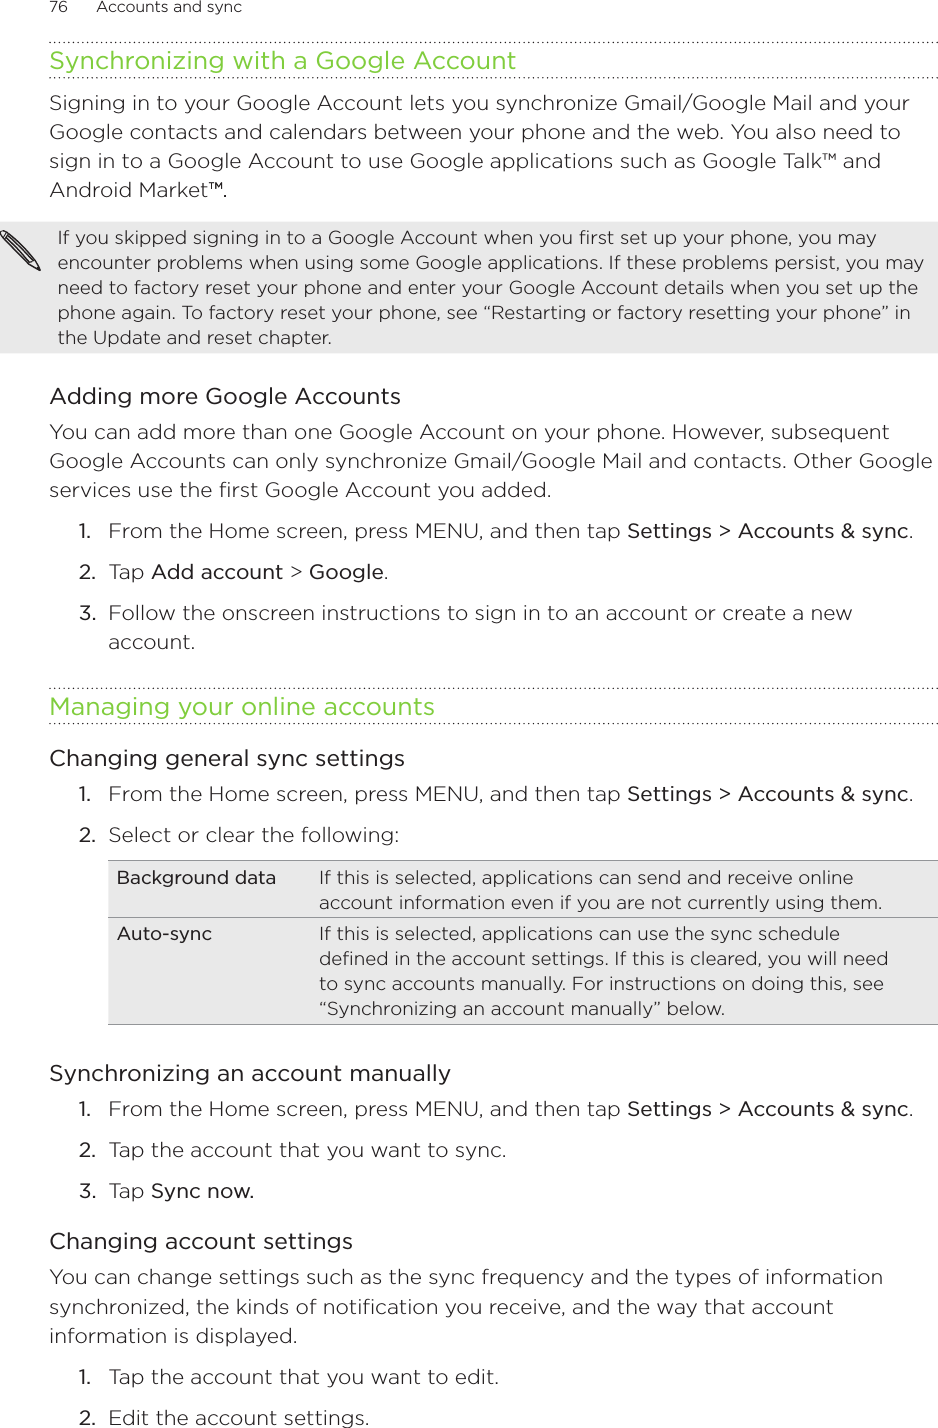 76      Accounts and sync      Synchronizing with a Google AccountSigning in to your Google Account lets you synchronize Gmail/Google Mail and your Google contacts and calendars between your phone and the web. You also need to sign in to a Google Account to use Google applications such as Google Talk™ and Android Market™.™..If you skipped signing in to a Google Account when you first set up your phone, you may encounter problems when using some Google applications. If these problems persist, you may need to factory reset your phone and enter your Google Account details when you set up the phone again. To factory reset your phone, see “Restarting or factory resetting your phone” in the Update and reset chapter.Adding more Google AccountsYou can add more than one Google Account on your phone. However, subsequent Google Accounts can only synchronize Gmail/Google Mail and contacts. Other Google services use the first Google Account you added.From the Home screen, press MENU, and then tap Settings &gt; Accounts &amp; sync. Tap Add account &gt; Google.Follow the onscreen instructions to sign in to an account or create a new account.Managing your online accountsChanging general sync settingsFrom the Home screen, press MENU, and then tap Settings &gt; Accounts &amp; sync. Select or clear the following:Background data If this is selected, applications can send and receive online account information even if you are not currently using them.Auto-sync If this is selected, applications can use the sync schedule defined in the account settings. If this is cleared, you will need to sync accounts manually. For instructions on doing this, see “Synchronizing an account manually” below.Synchronizing an account manuallyFrom the Home screen, press MENU, and then tap Settings &gt; Accounts &amp; sync. Tap the account that you want to sync.Tap Sync now.Changing account settingsYou can change settings such as the sync frequency and the types of information synchronized, the kinds of notification you receive, and the way that account information is displayed.Tap the account that you want to edit.Edit the account settings.1.2.3.1.2.1.2.3.1.2.